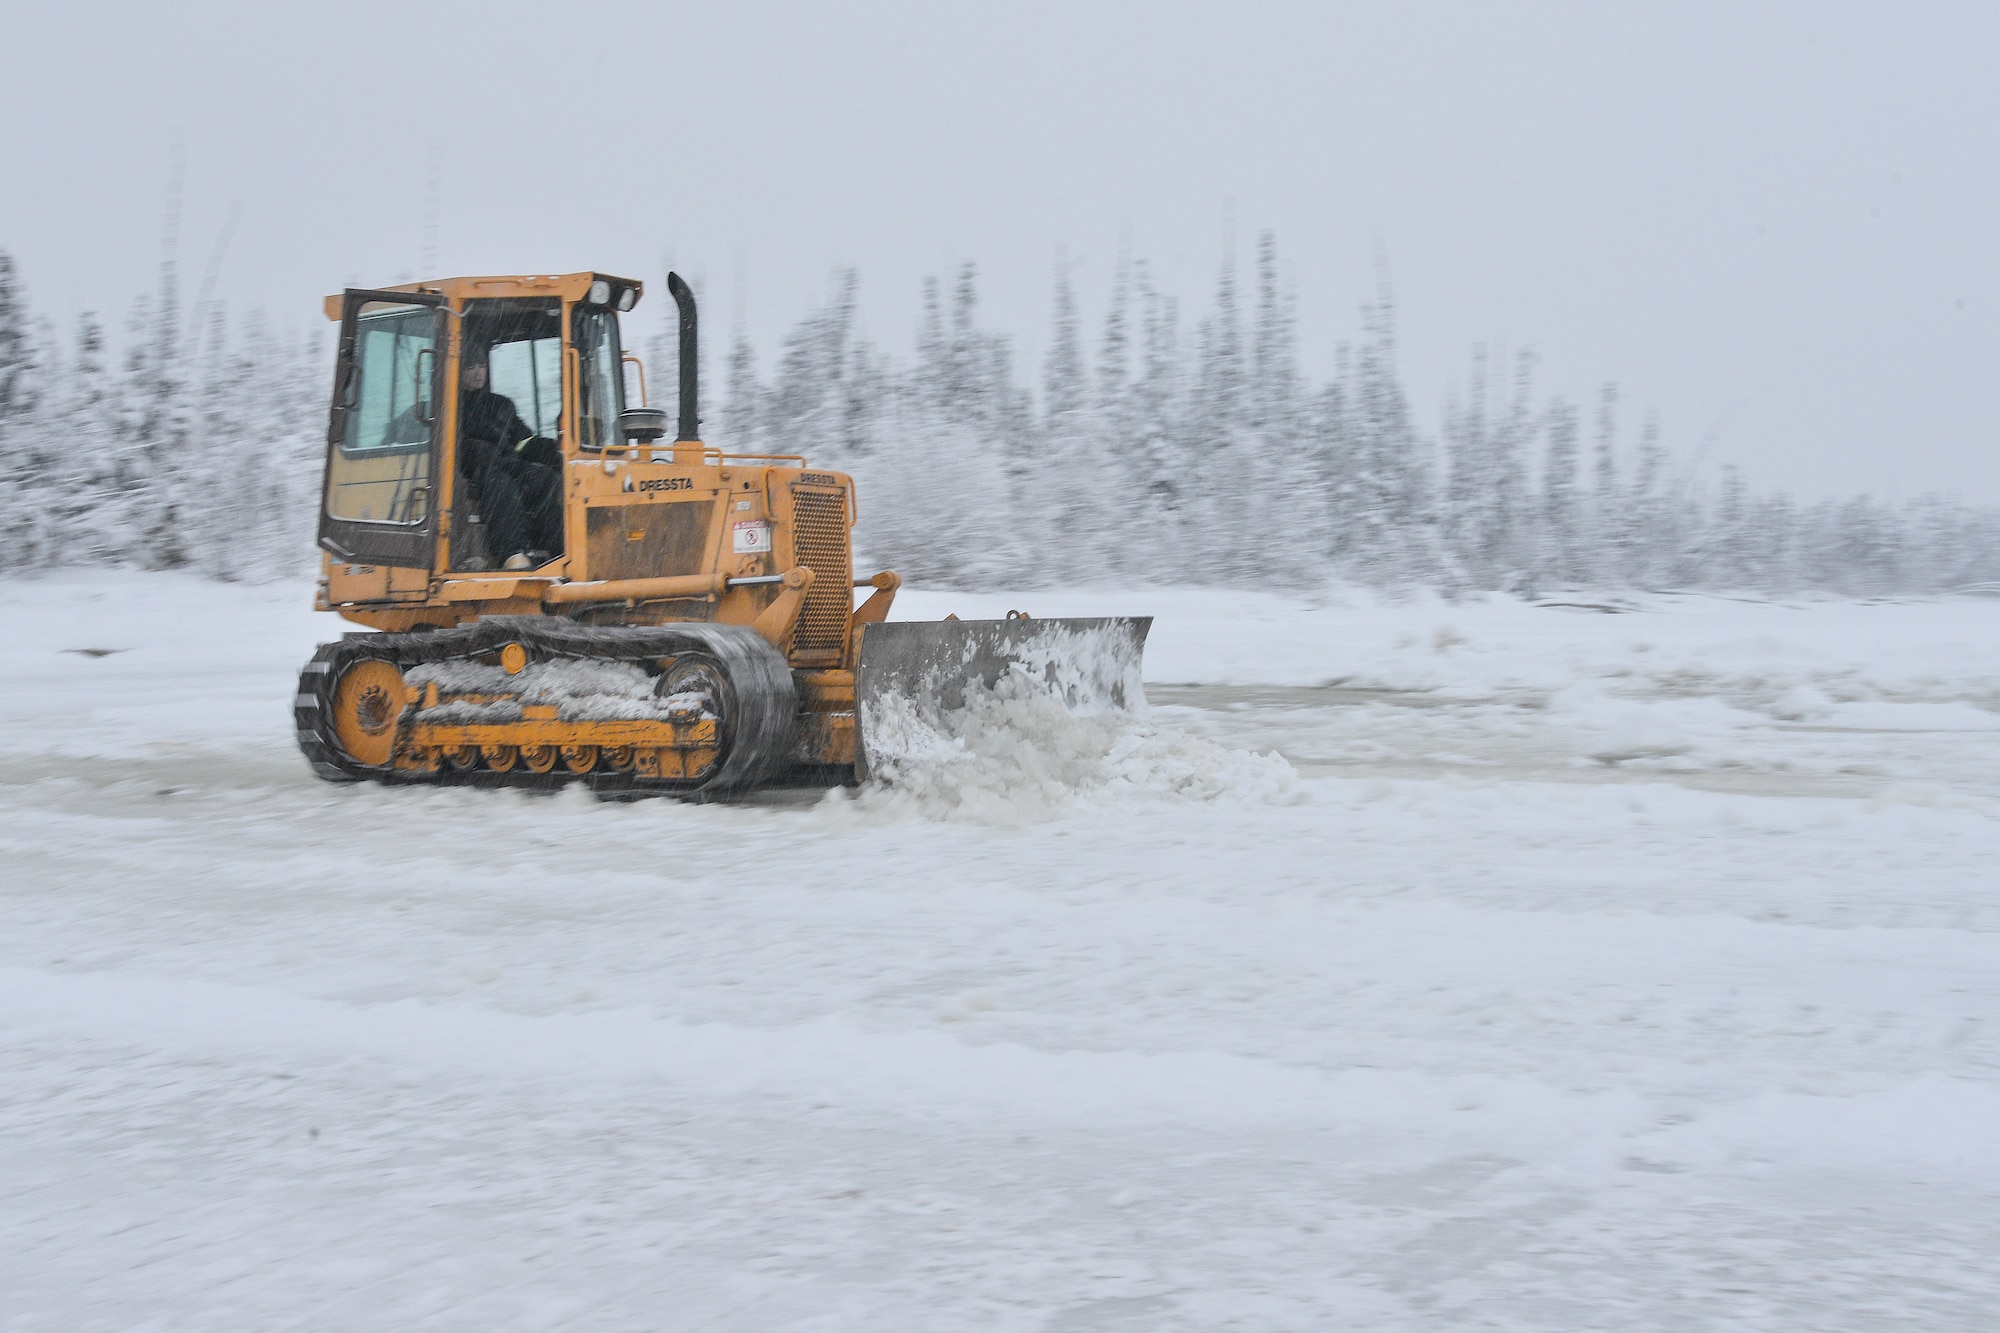 Senior Airman Zach Harter uses a bulldozer to build an ice bridge Dec. 2, 2014, in Fairbanks, Alaska. The bridge must be constructed every other year to provide access to the $20 million range complex used to train pilots from around the world during Red Flag-Alaska exercises. Harter is a heavy equipment operator assigned to the 354th Civil Engineer Squadron on Eielson Air Force Base, Alaska. (U.S. Air Force photo/Tech. Sgt. Joseph Swafford)